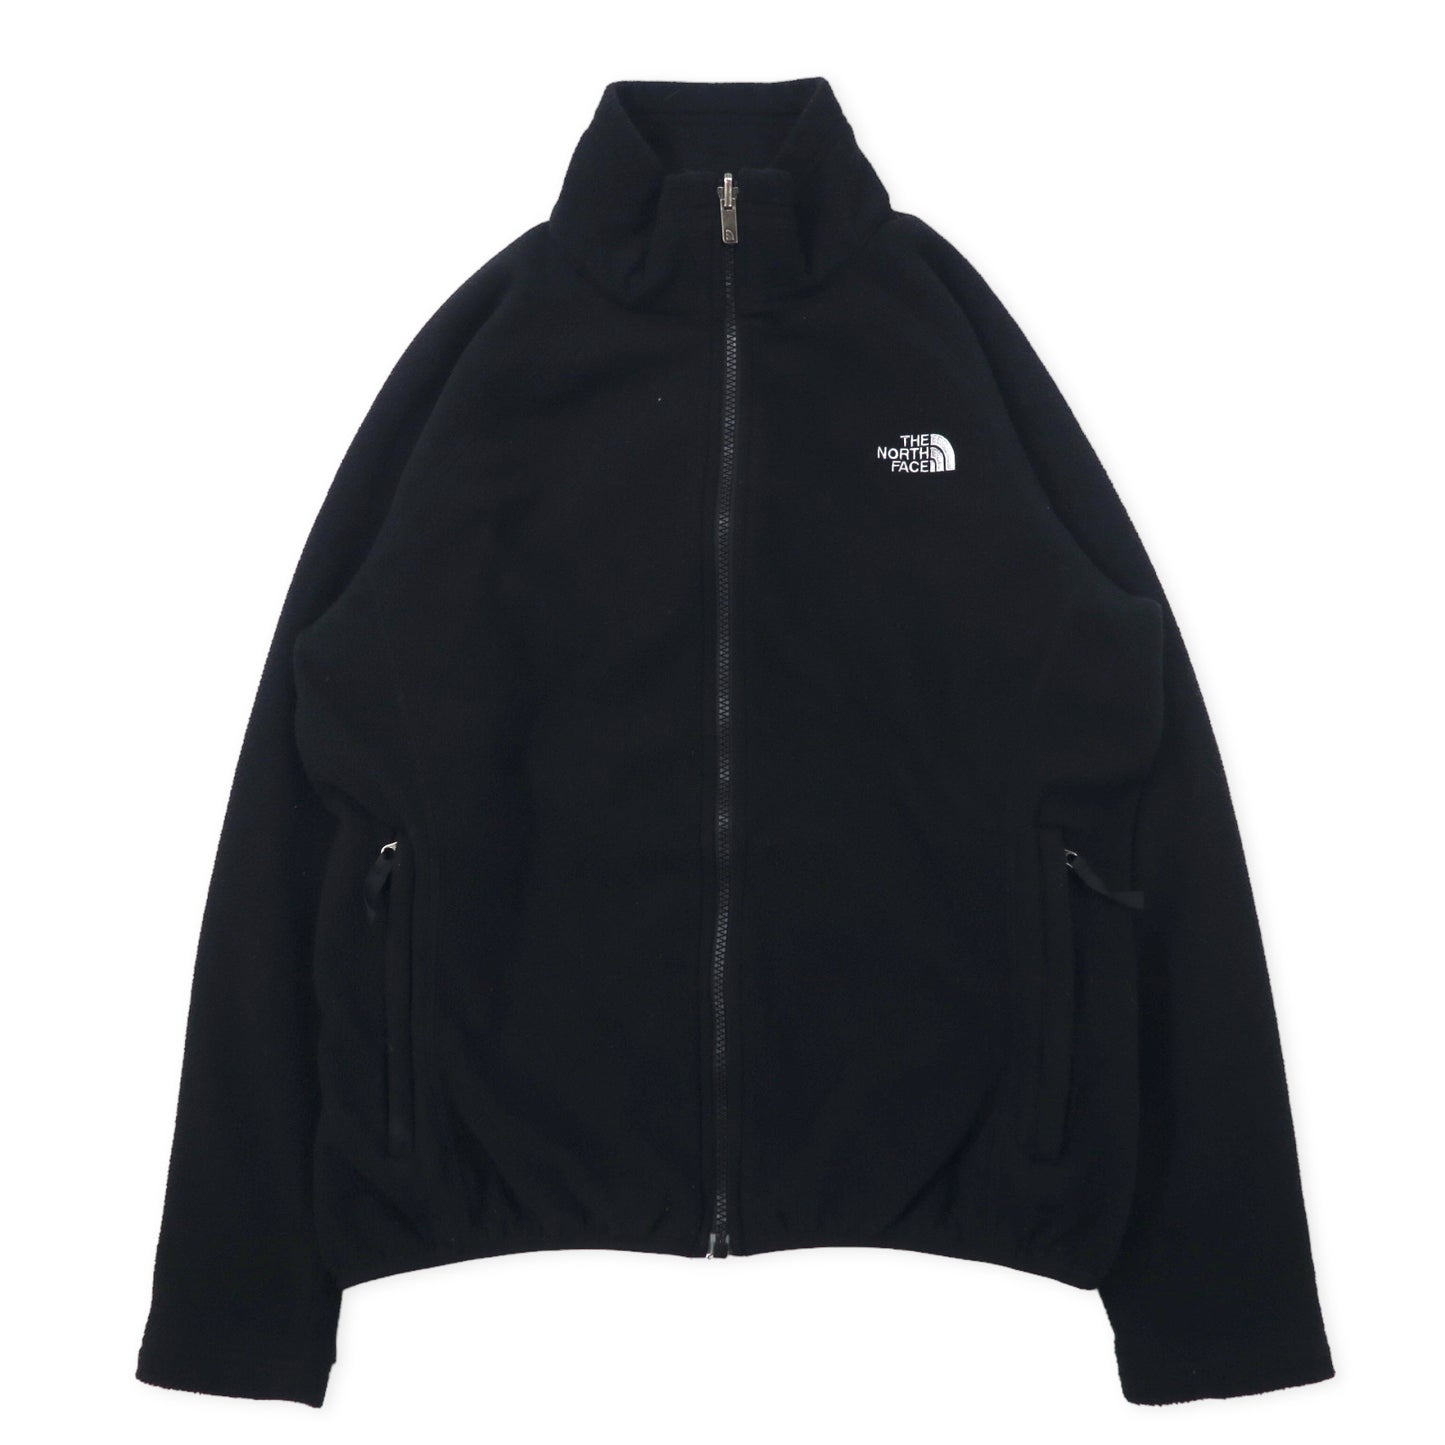 THE NORTH FACE FLEECE Jacket S Black polyester logo embroidery 